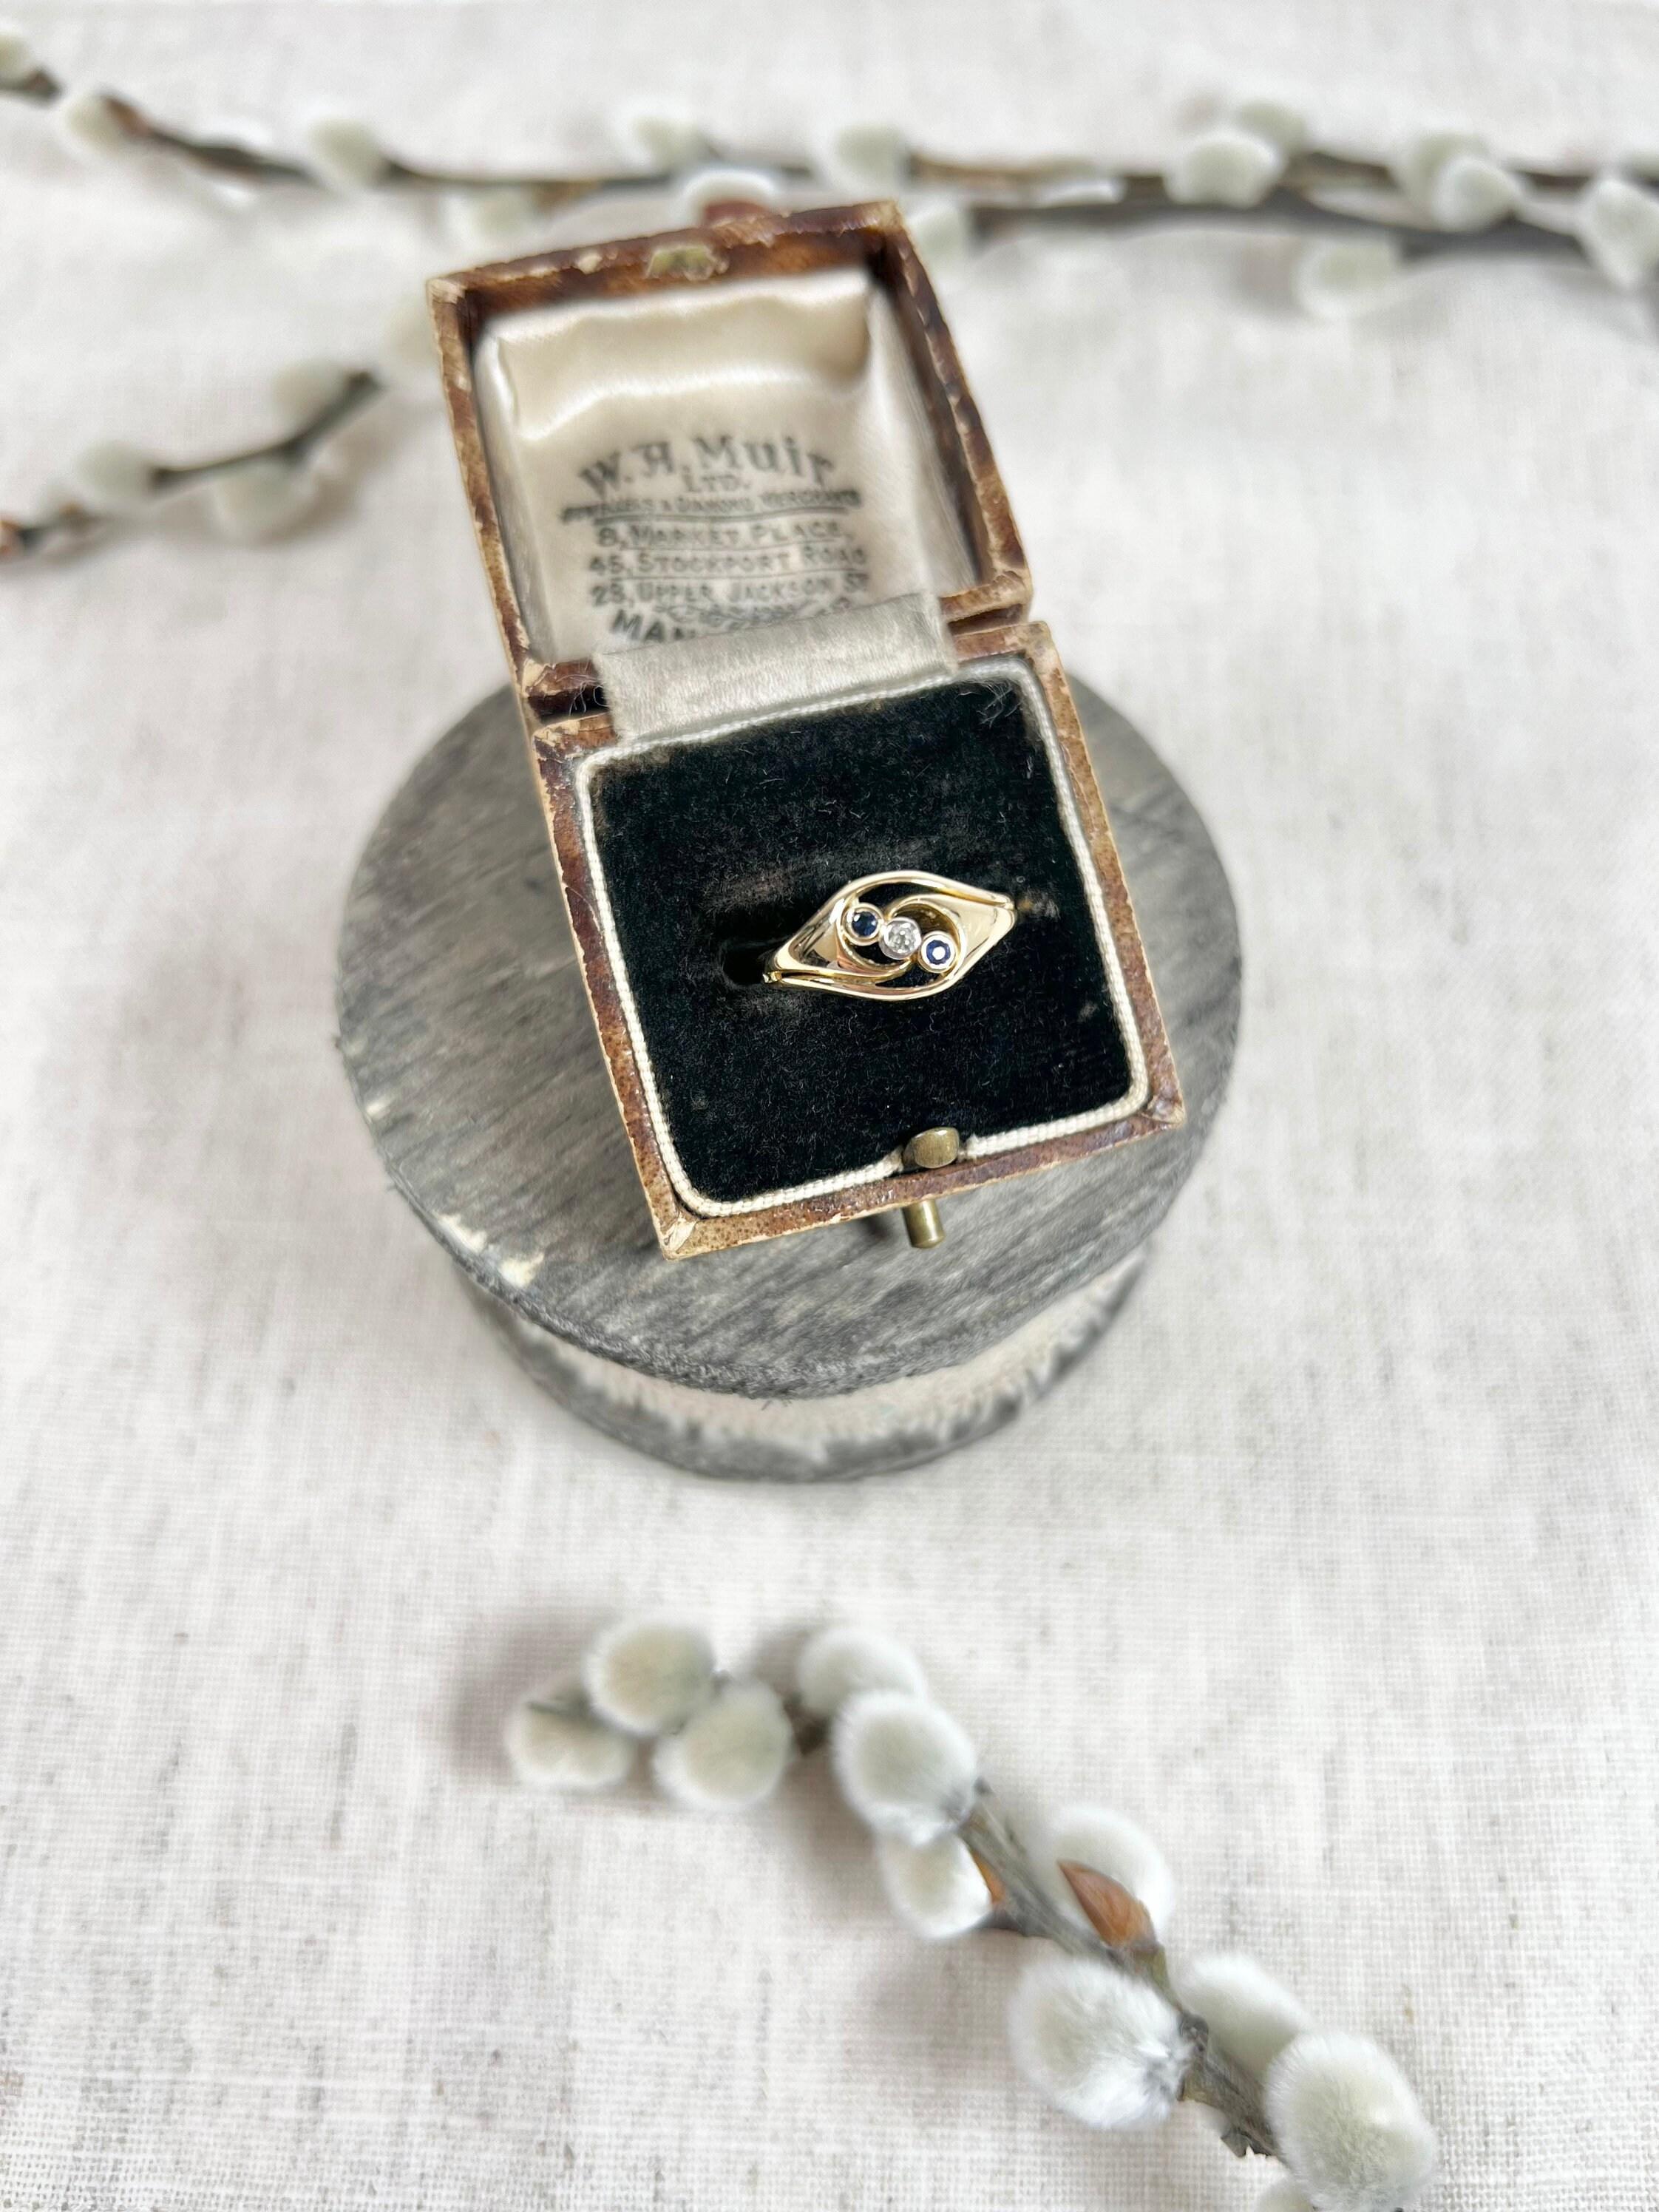 Antique Sapphire & Diamond Ring 

18ct Gold 

Makers Mark H W Ltd

Pretty, Edwardian three stone ring. Set with a centre diamond & two natural sapphire stones- mounted diagonally on a lovely crossover, 18ct gold band. 

Height of the ring measures